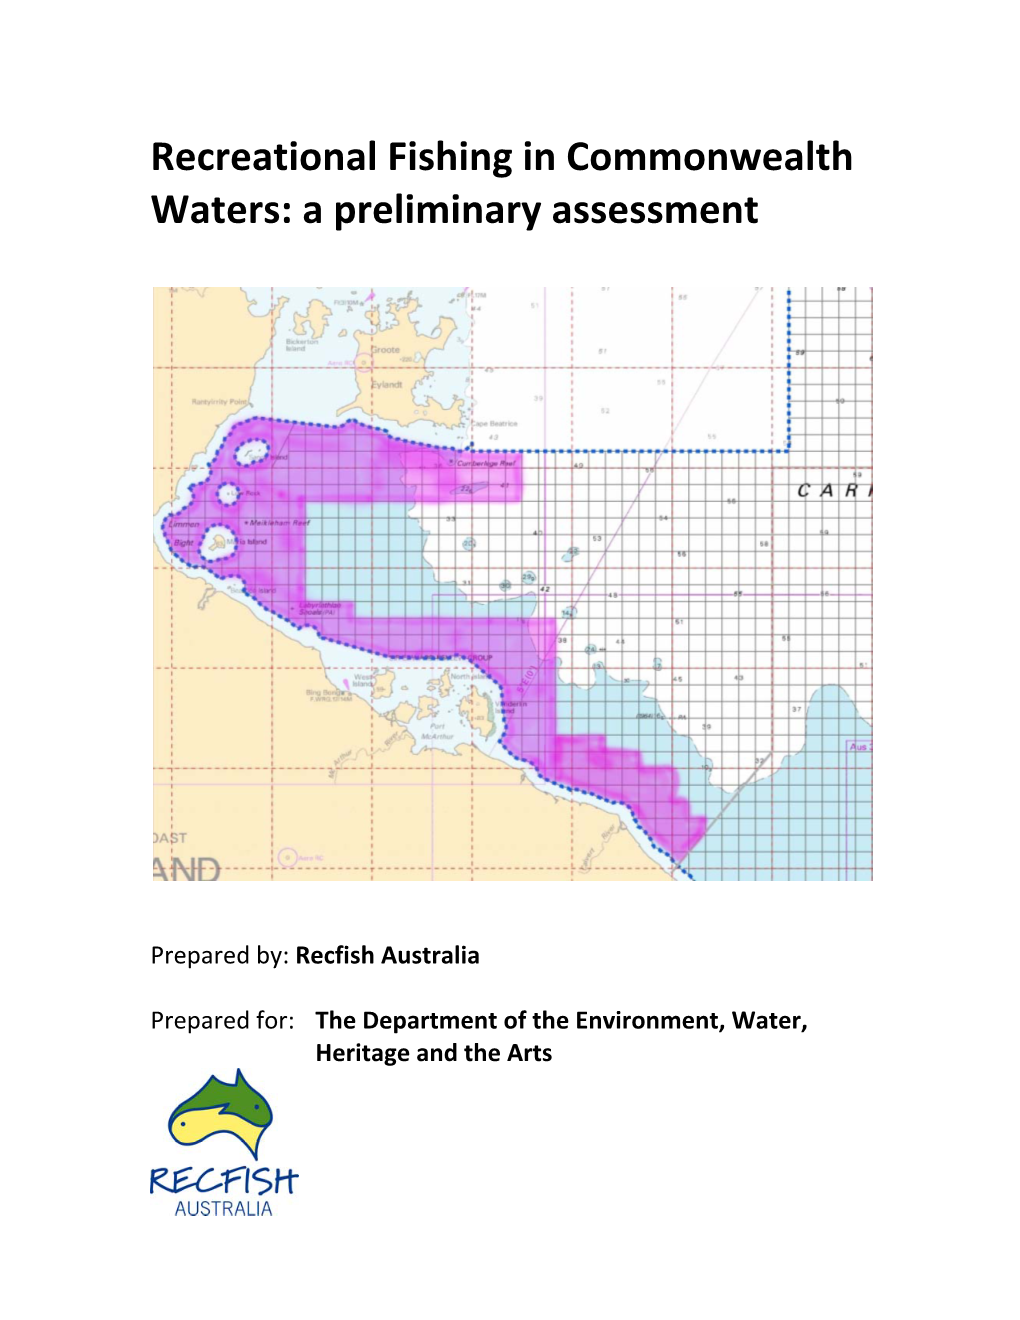 Recreational Fishing in Commonwealth Waters: a Preliminary Assessment